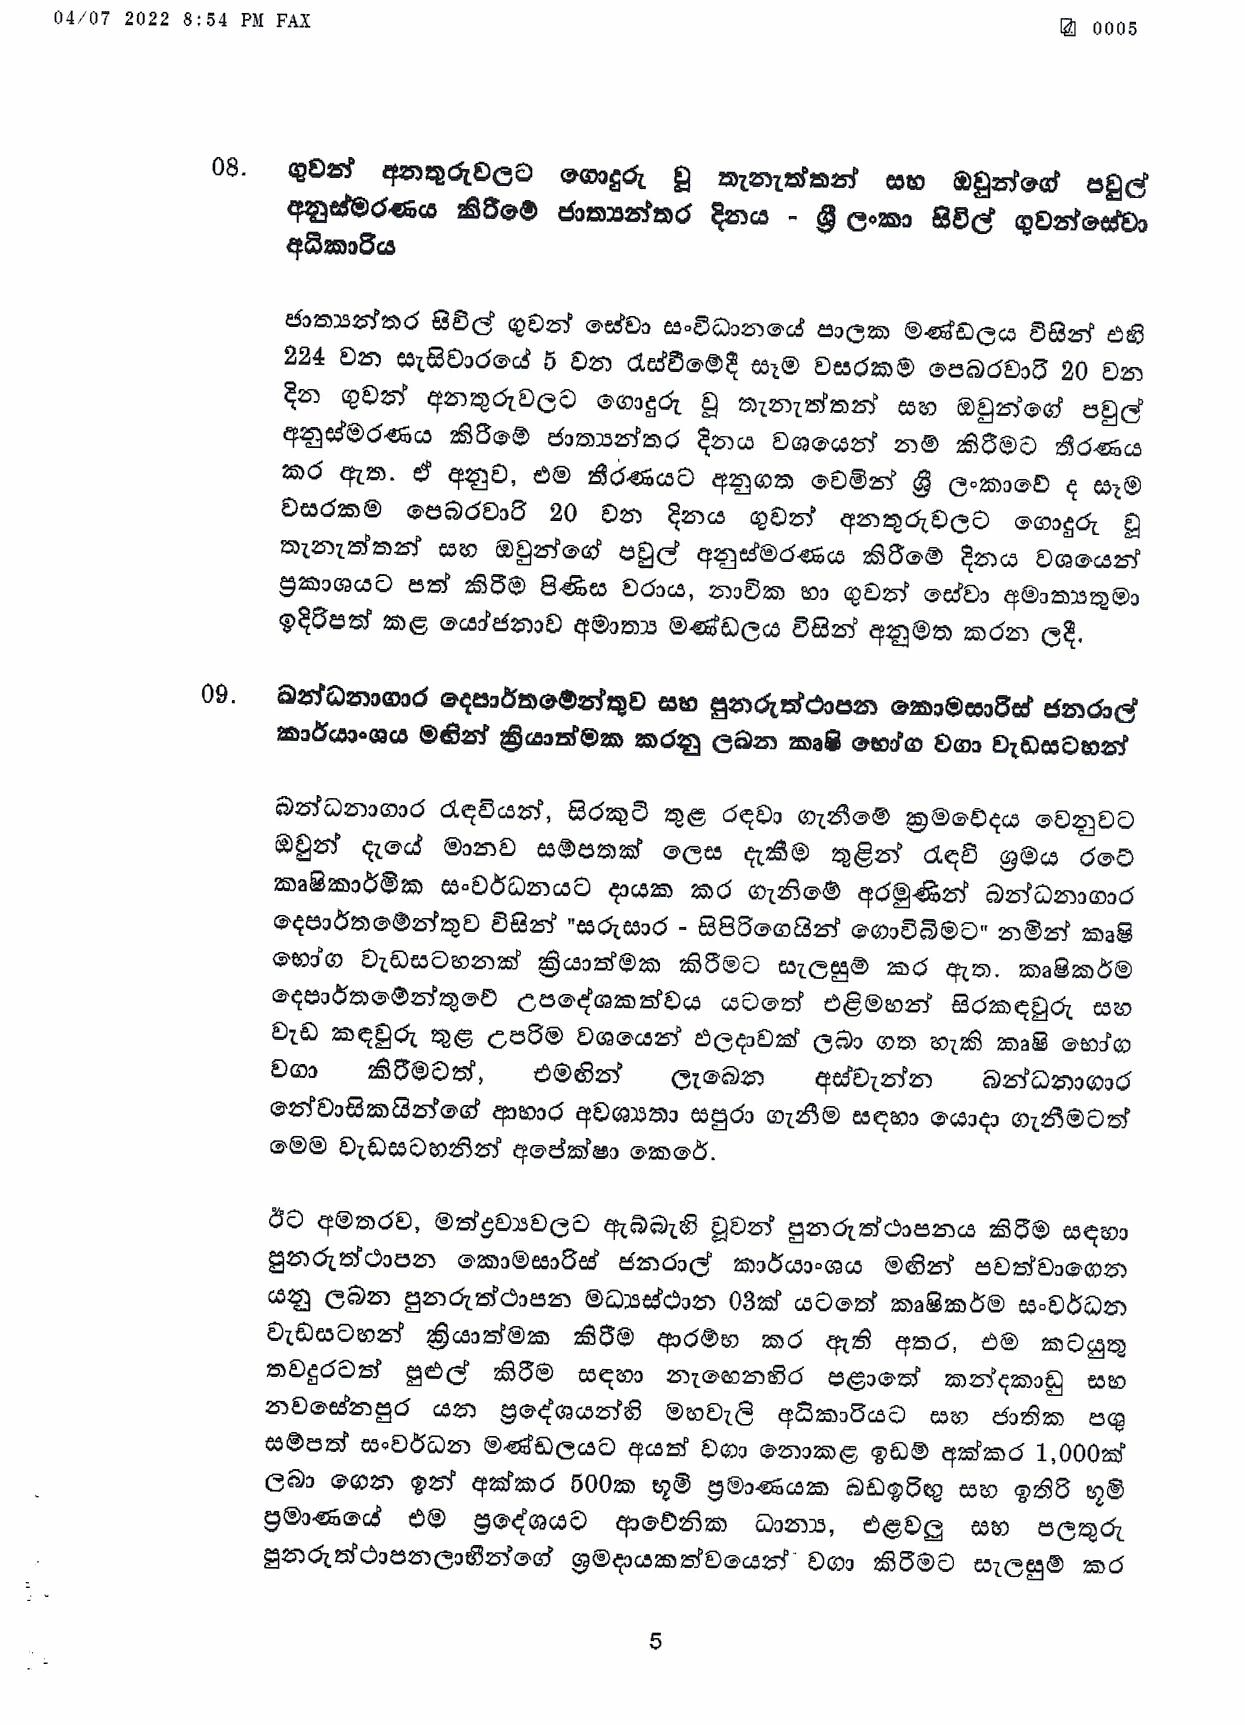 Cabinet Decision on 04.07.2022 page 005